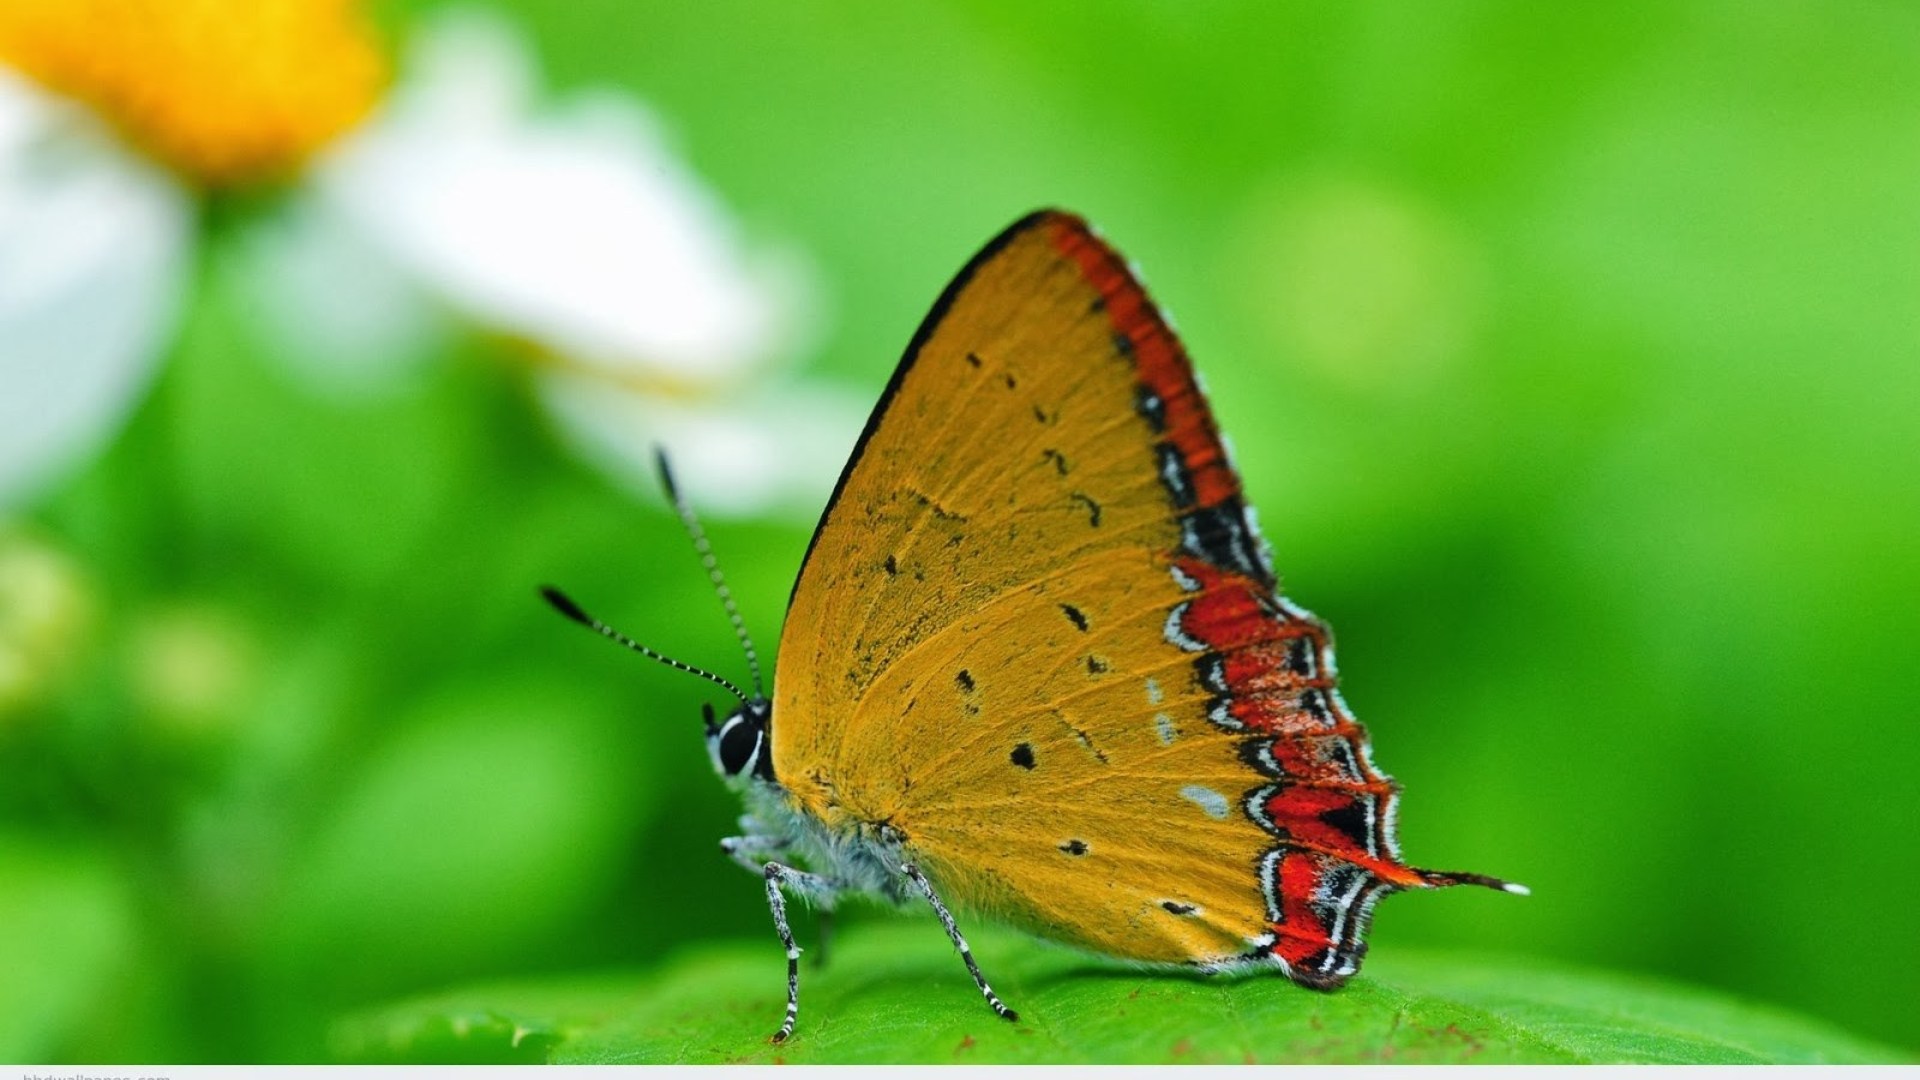 Full HD Nature Image 1080p Desktop With Macro Photo Of Butterfly